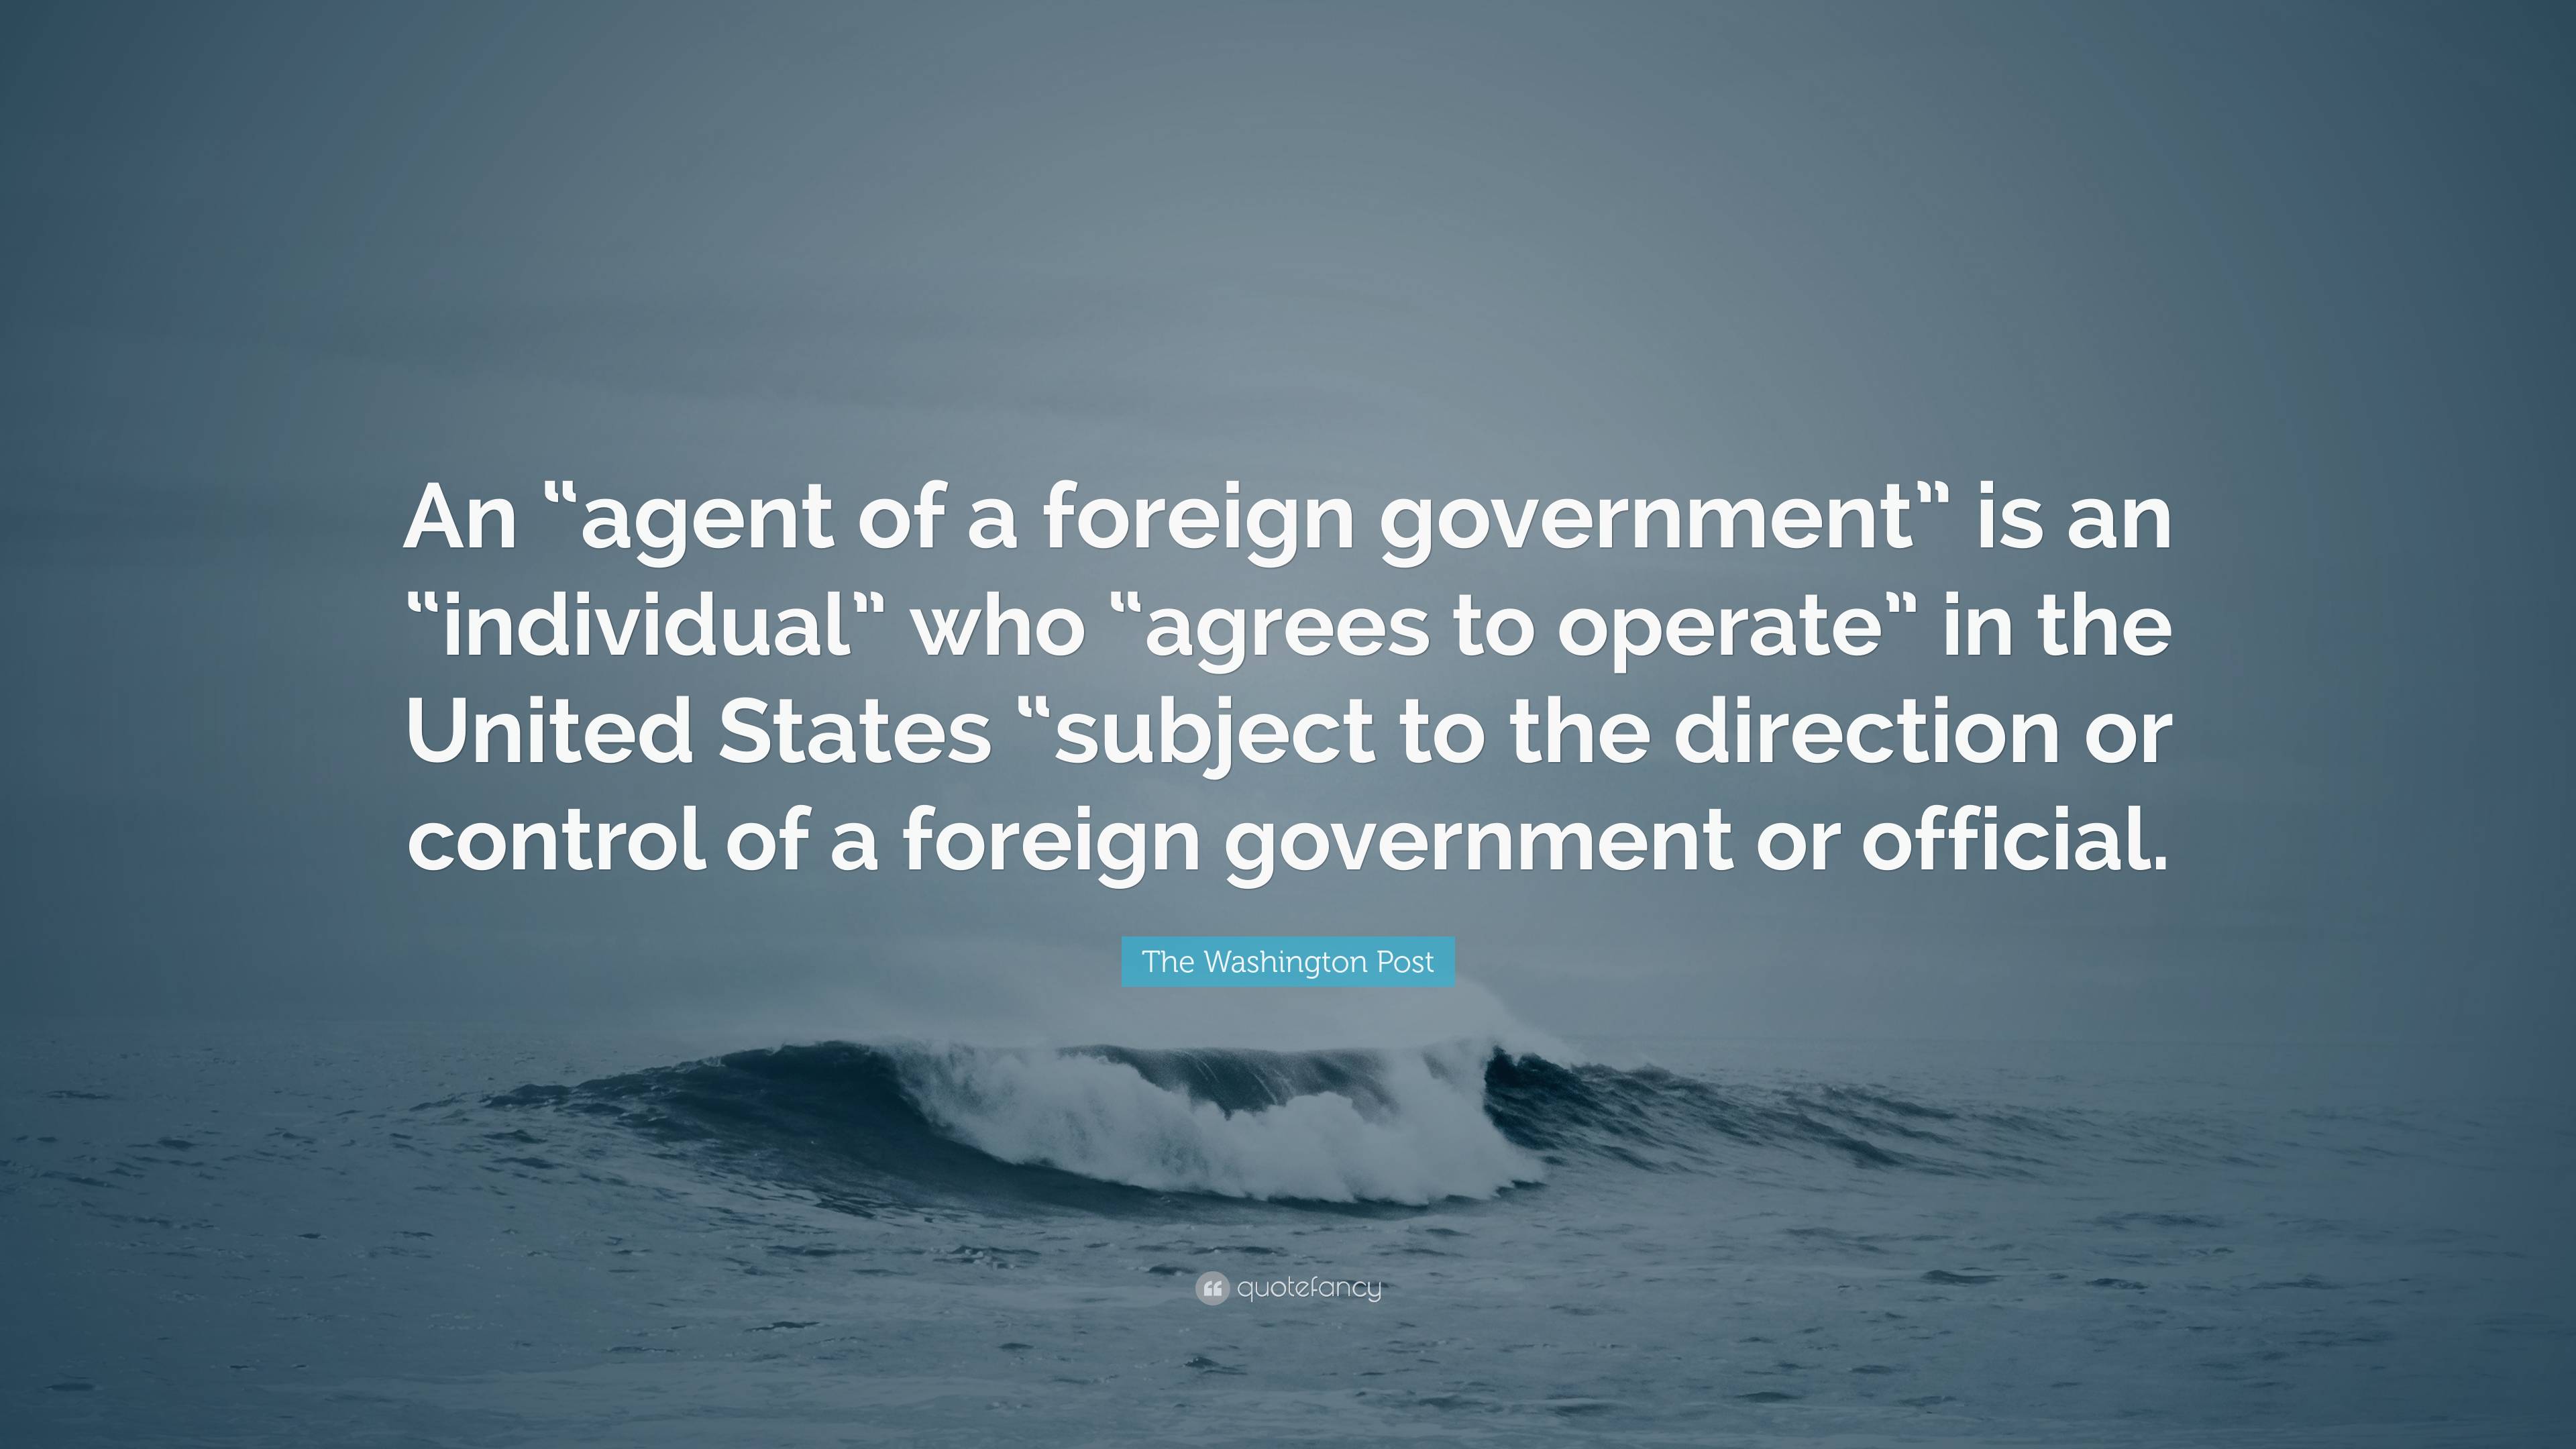 The Washington Post Quote: “An “agent of a foreign government” is an “individual” who “agrees to operate” in the United States “subject to the direc.” (2 wallpaper)